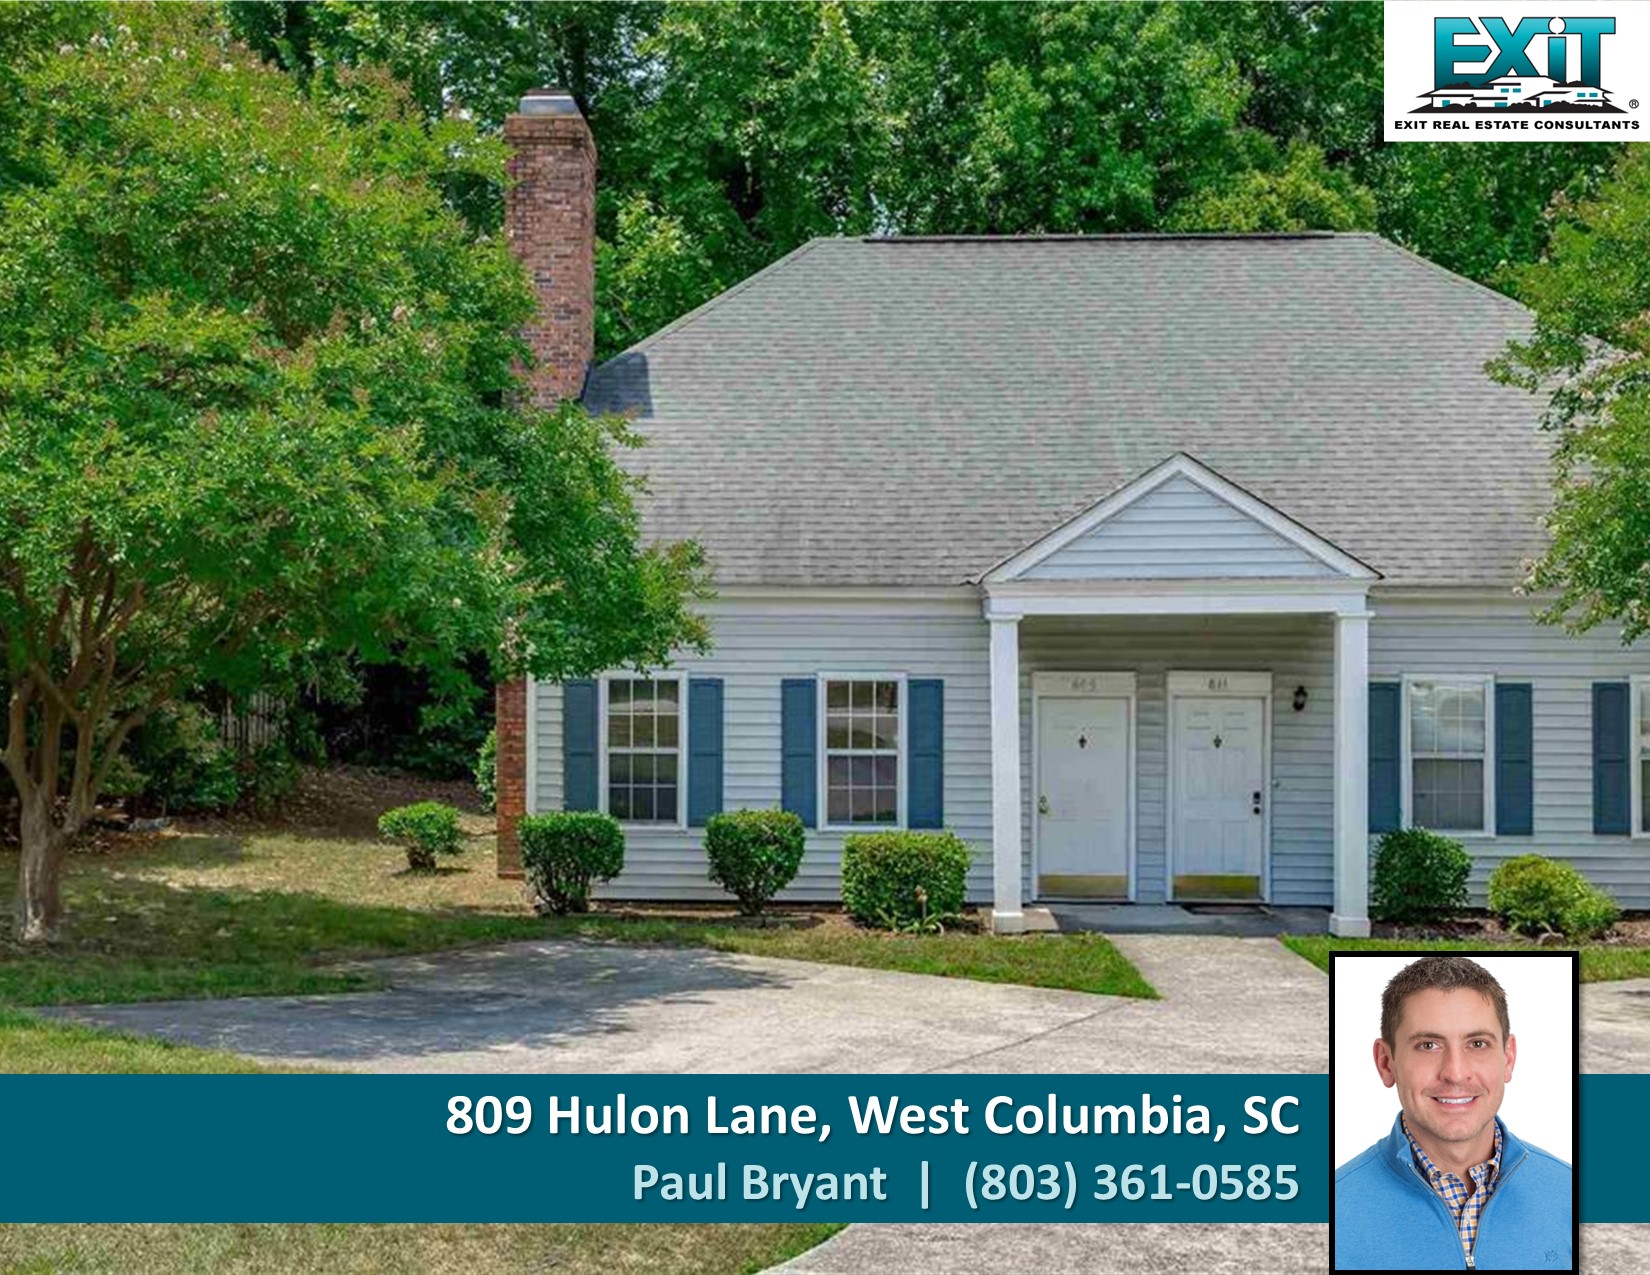 Just listed in Lexington Commons